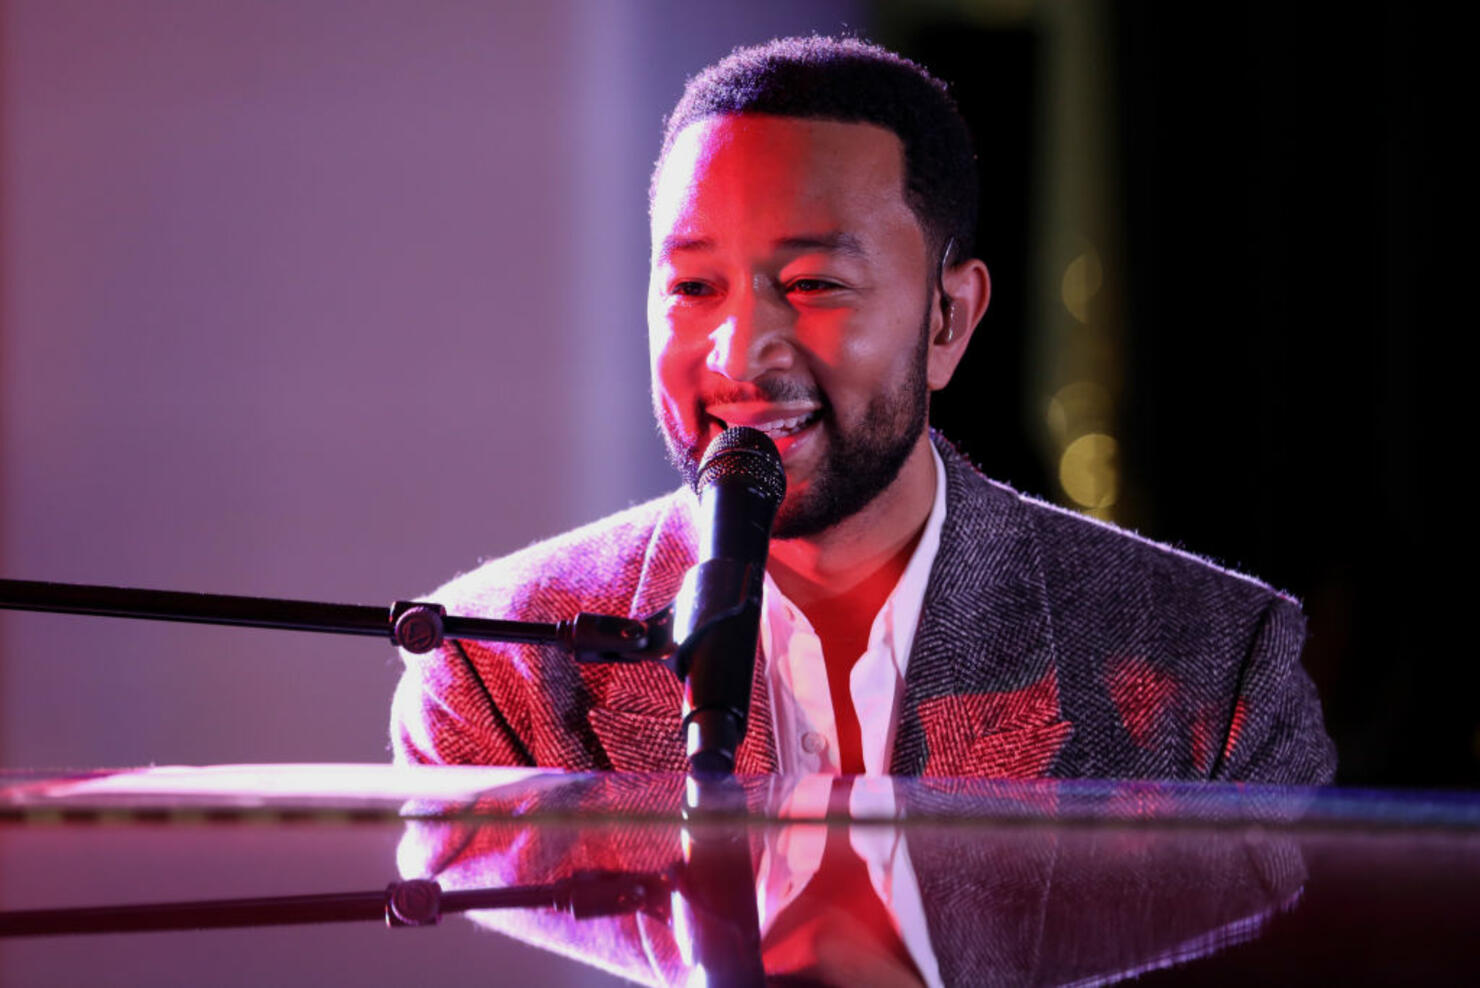 Nordstrom Celebrates A Legendary Holiday With John Legend And Sperry